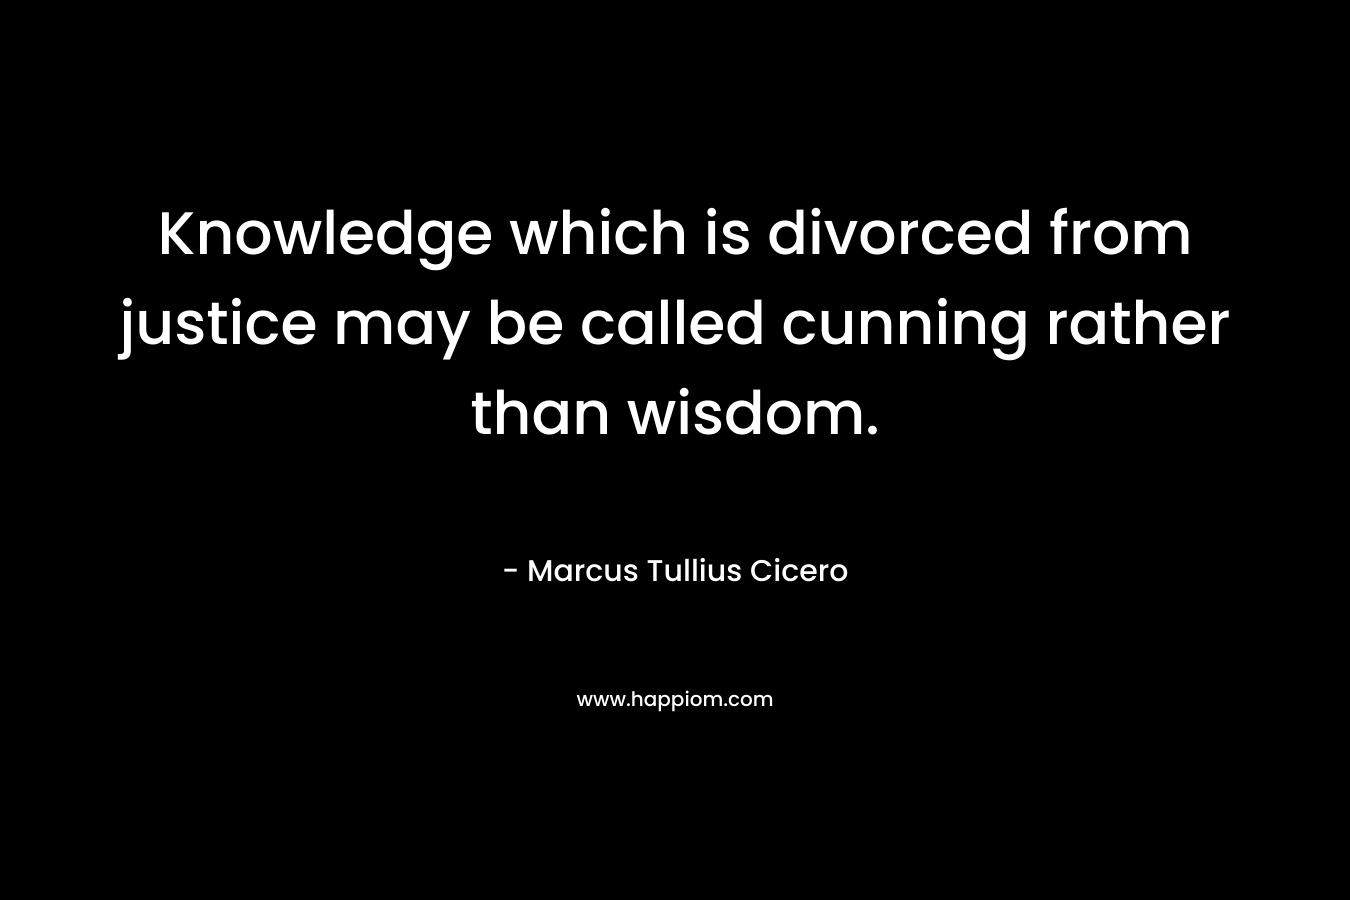 Knowledge which is divorced from justice may be called cunning rather than wisdom. – Marcus Tullius Cicero